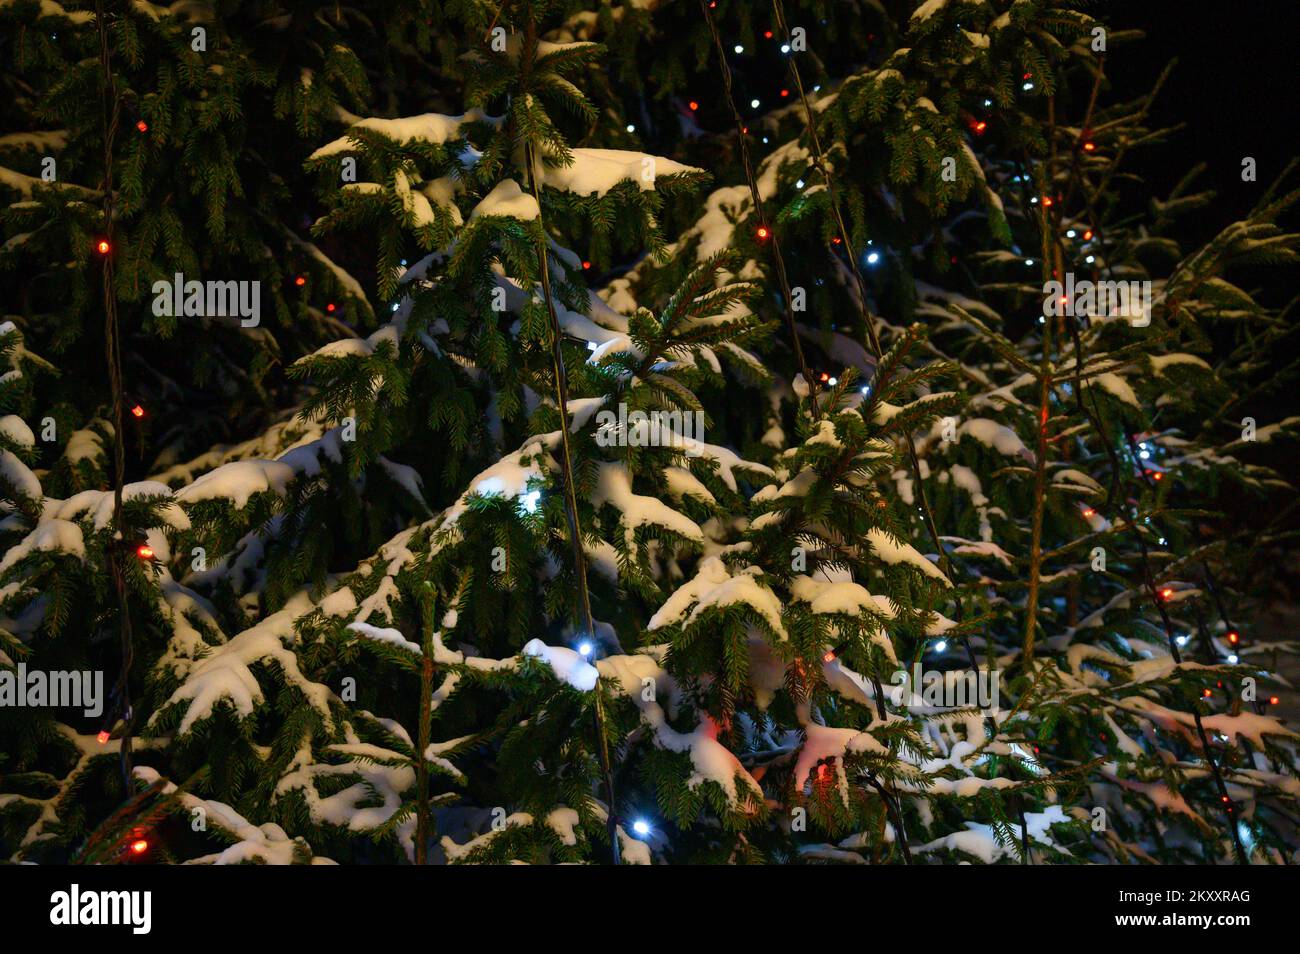 christmas lights hanging in a tree Stock Photo